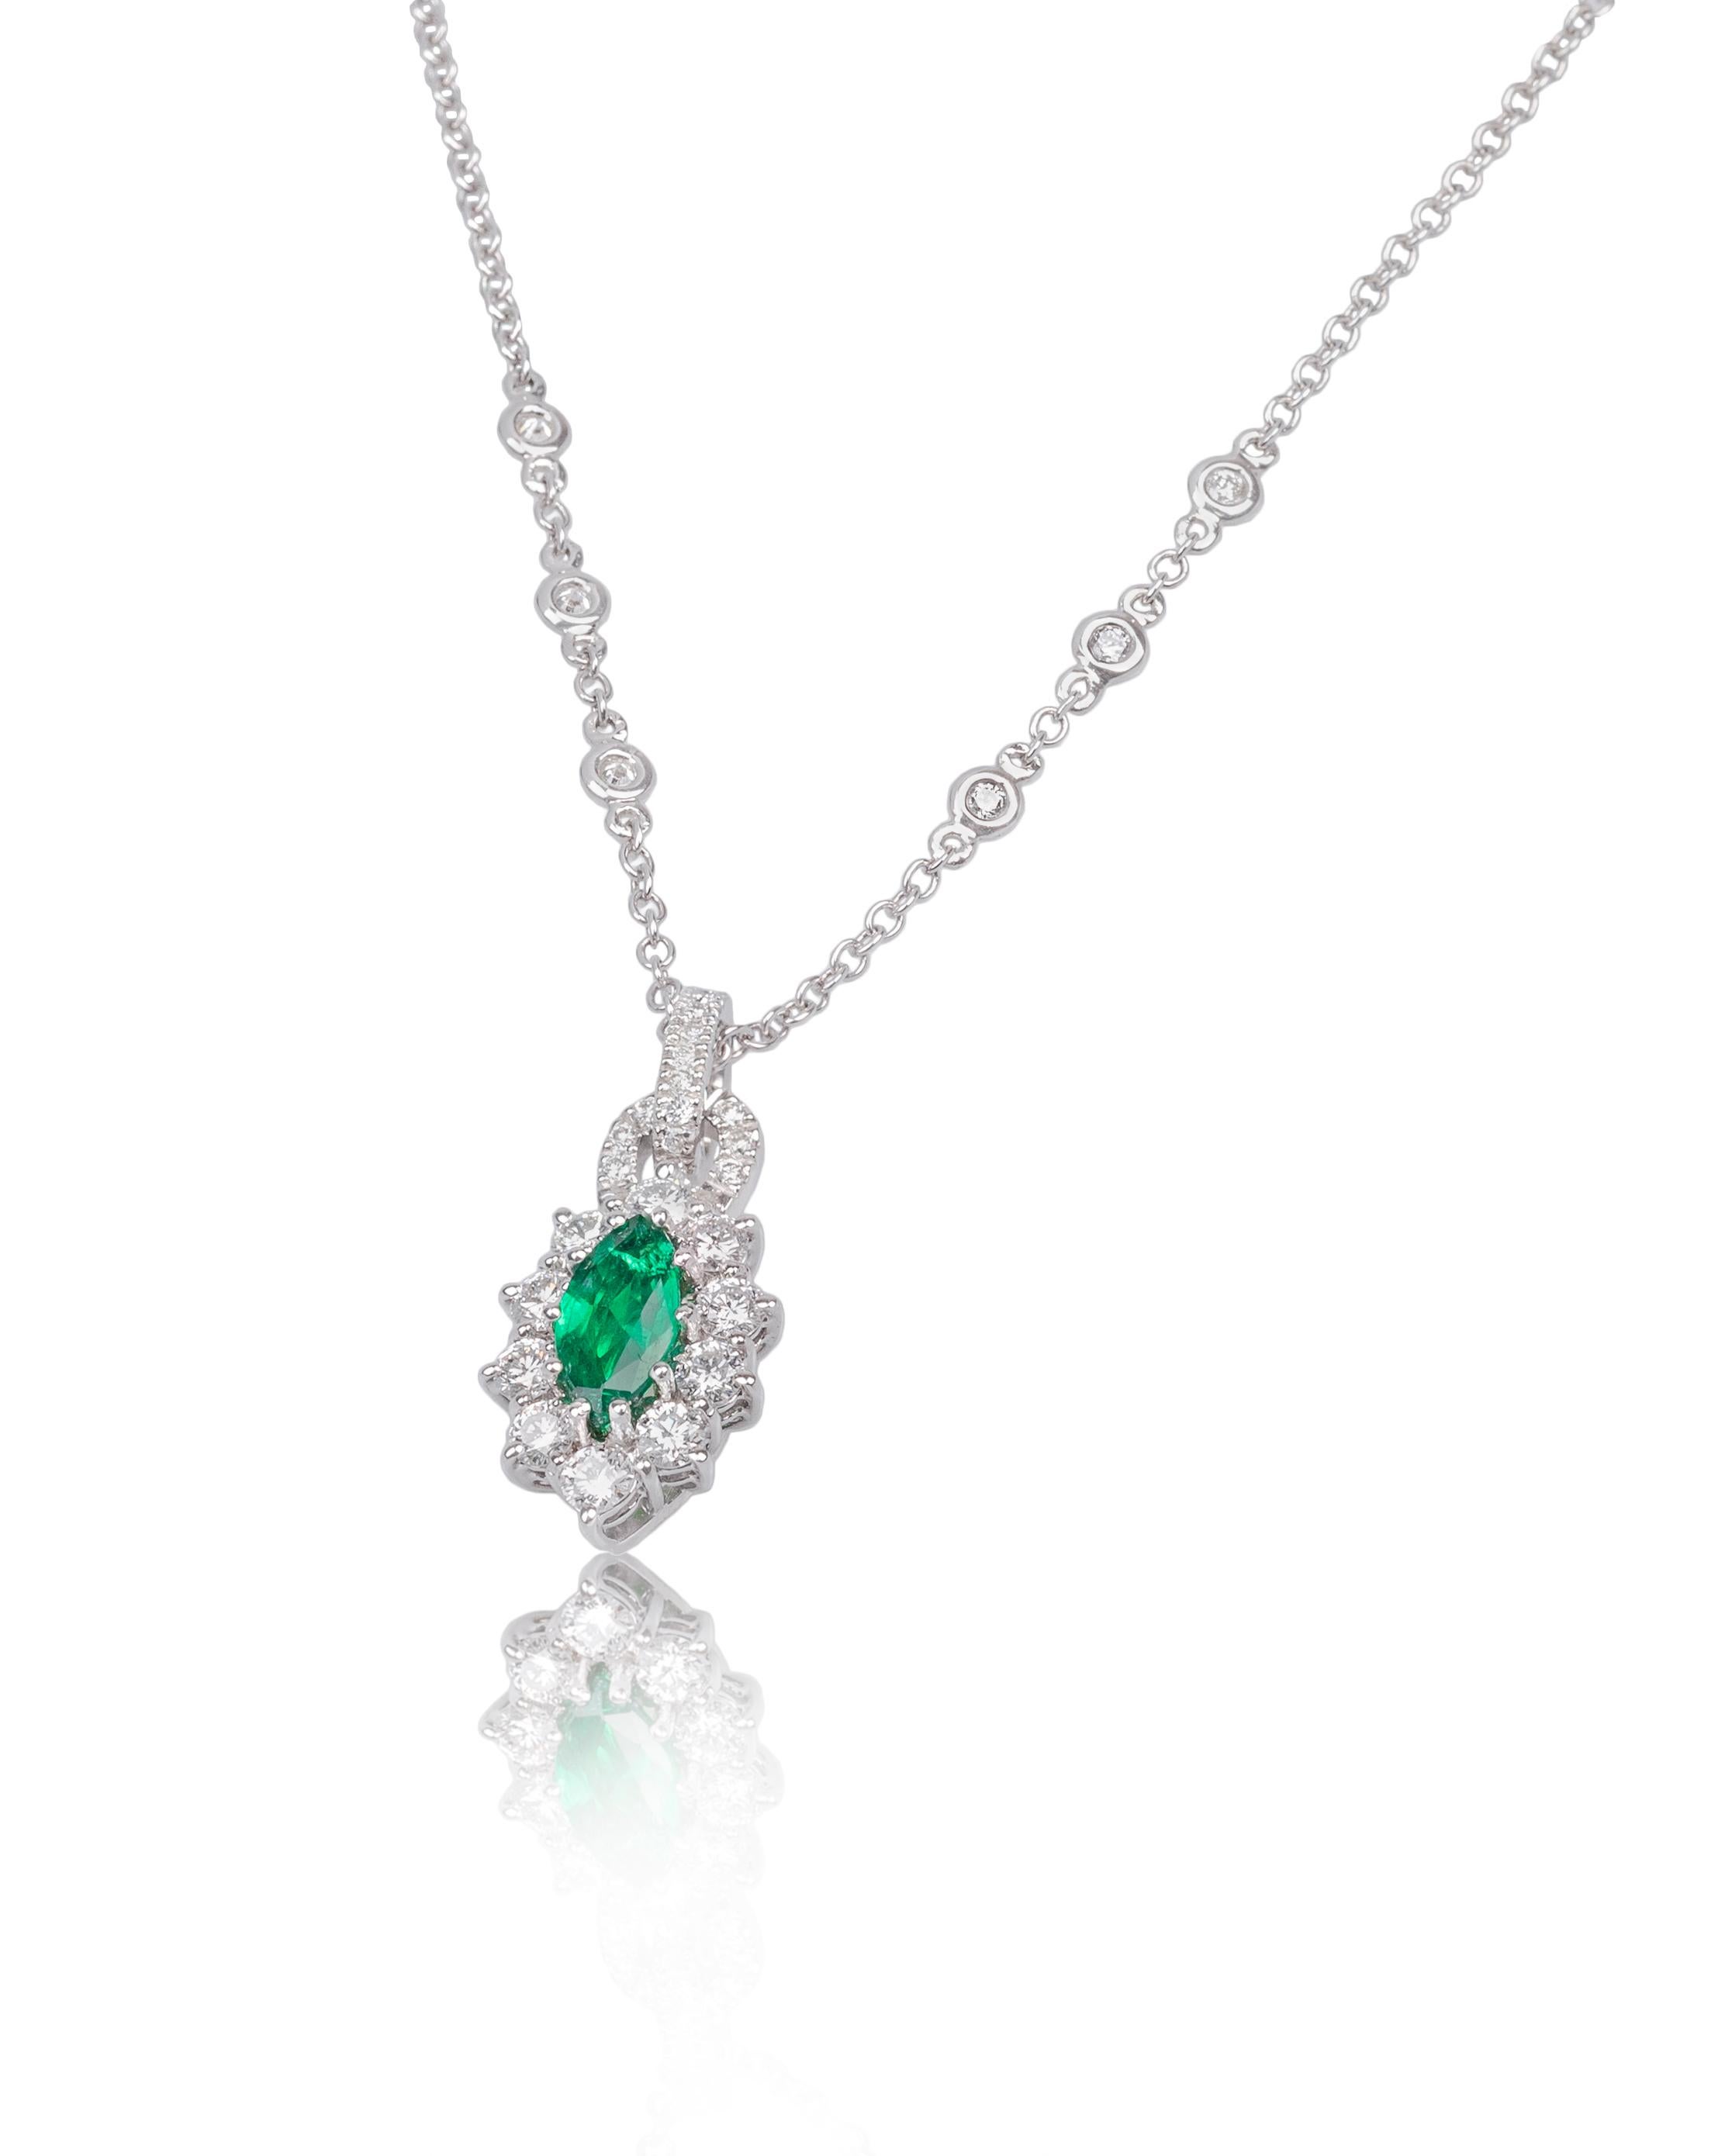 Marquise Cut 1.30ct Navette 'Marquise' Cut Emerand and Brilliant Cut Diamonds Necklace